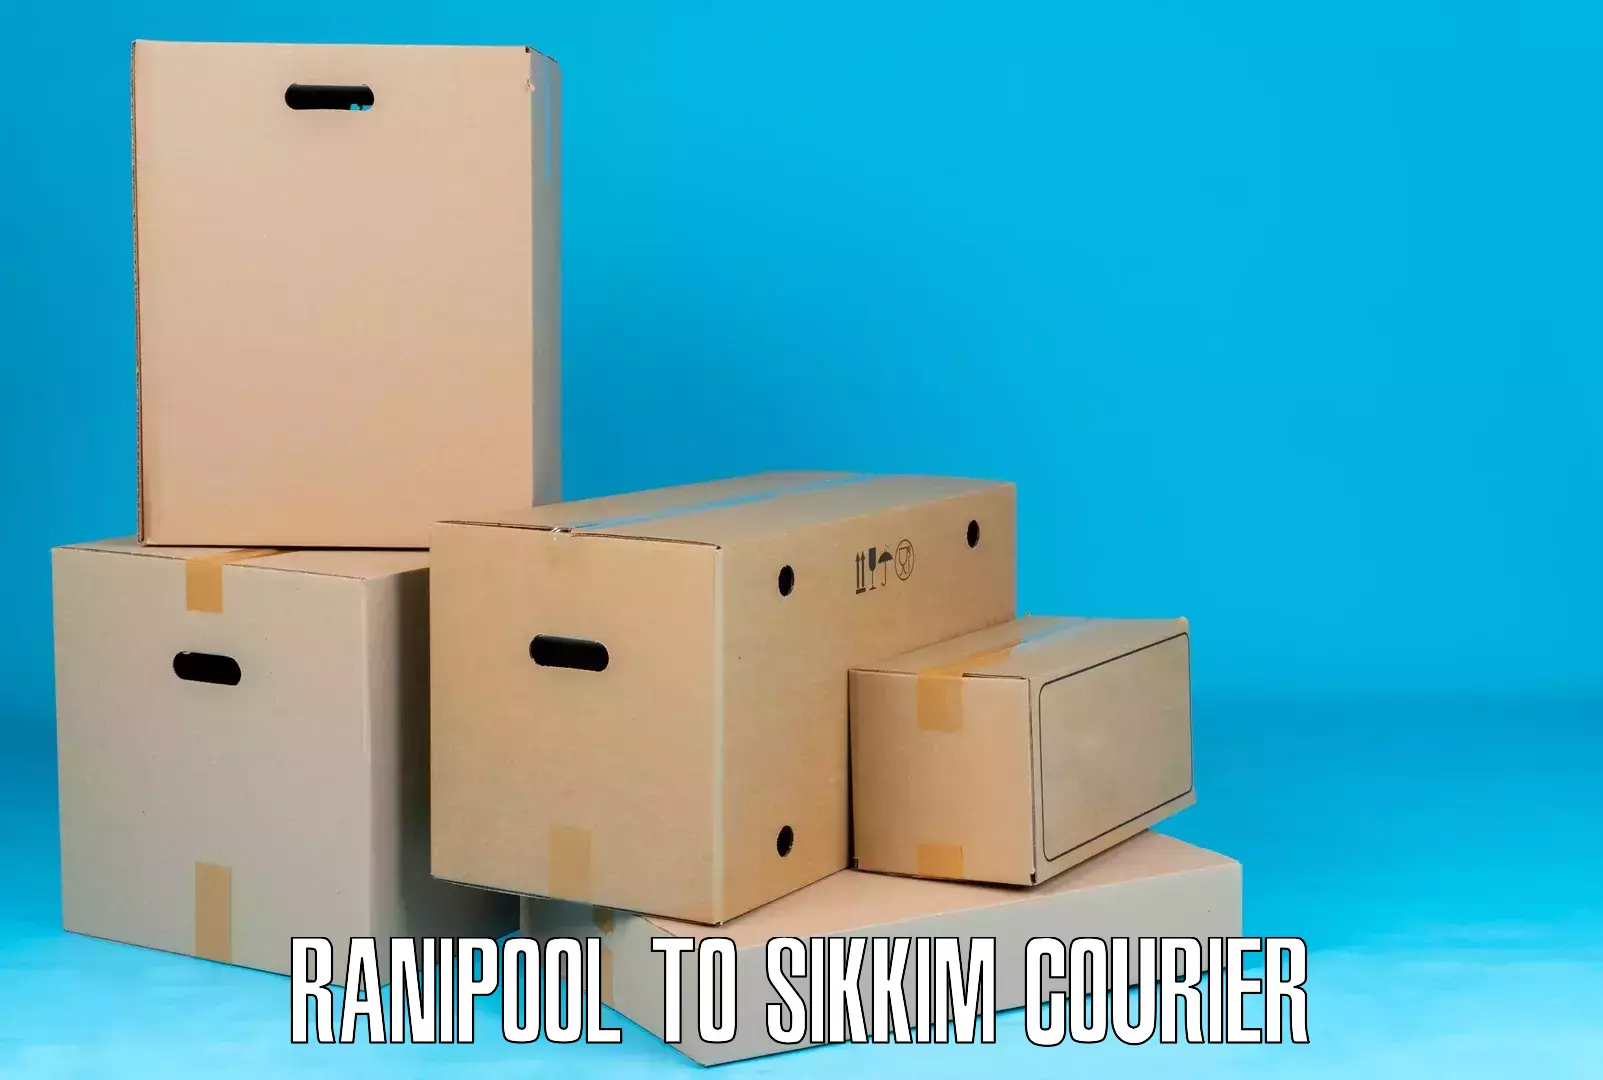 Courier service partnerships Ranipool to Geyzing